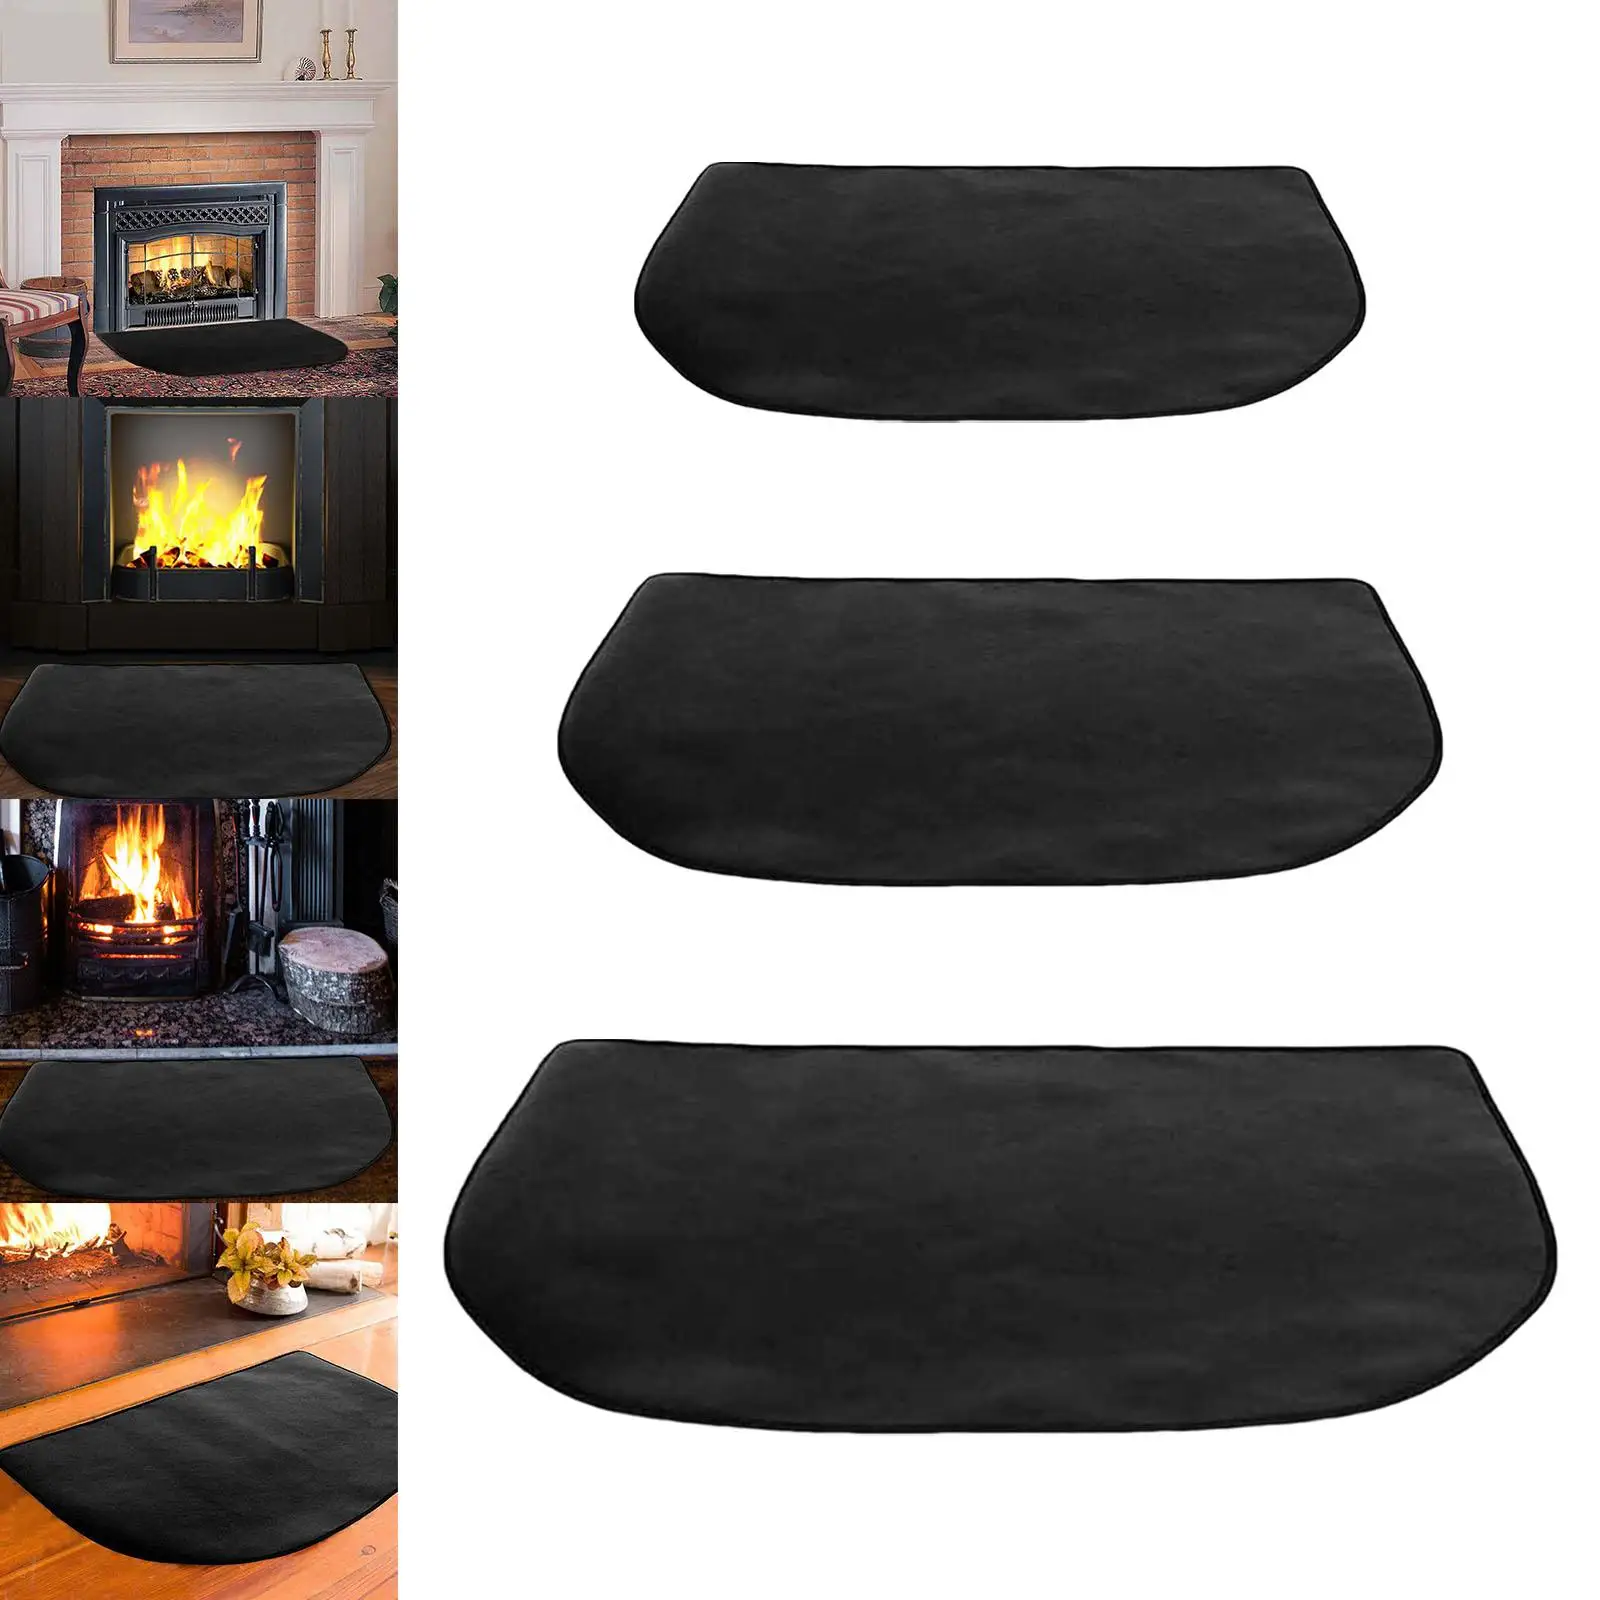 Heat Shield for Outdoor Grill Fireproof Grill Pad Protects Decks and Patios Black Protective Pad for Fireplaces Camping Balcony